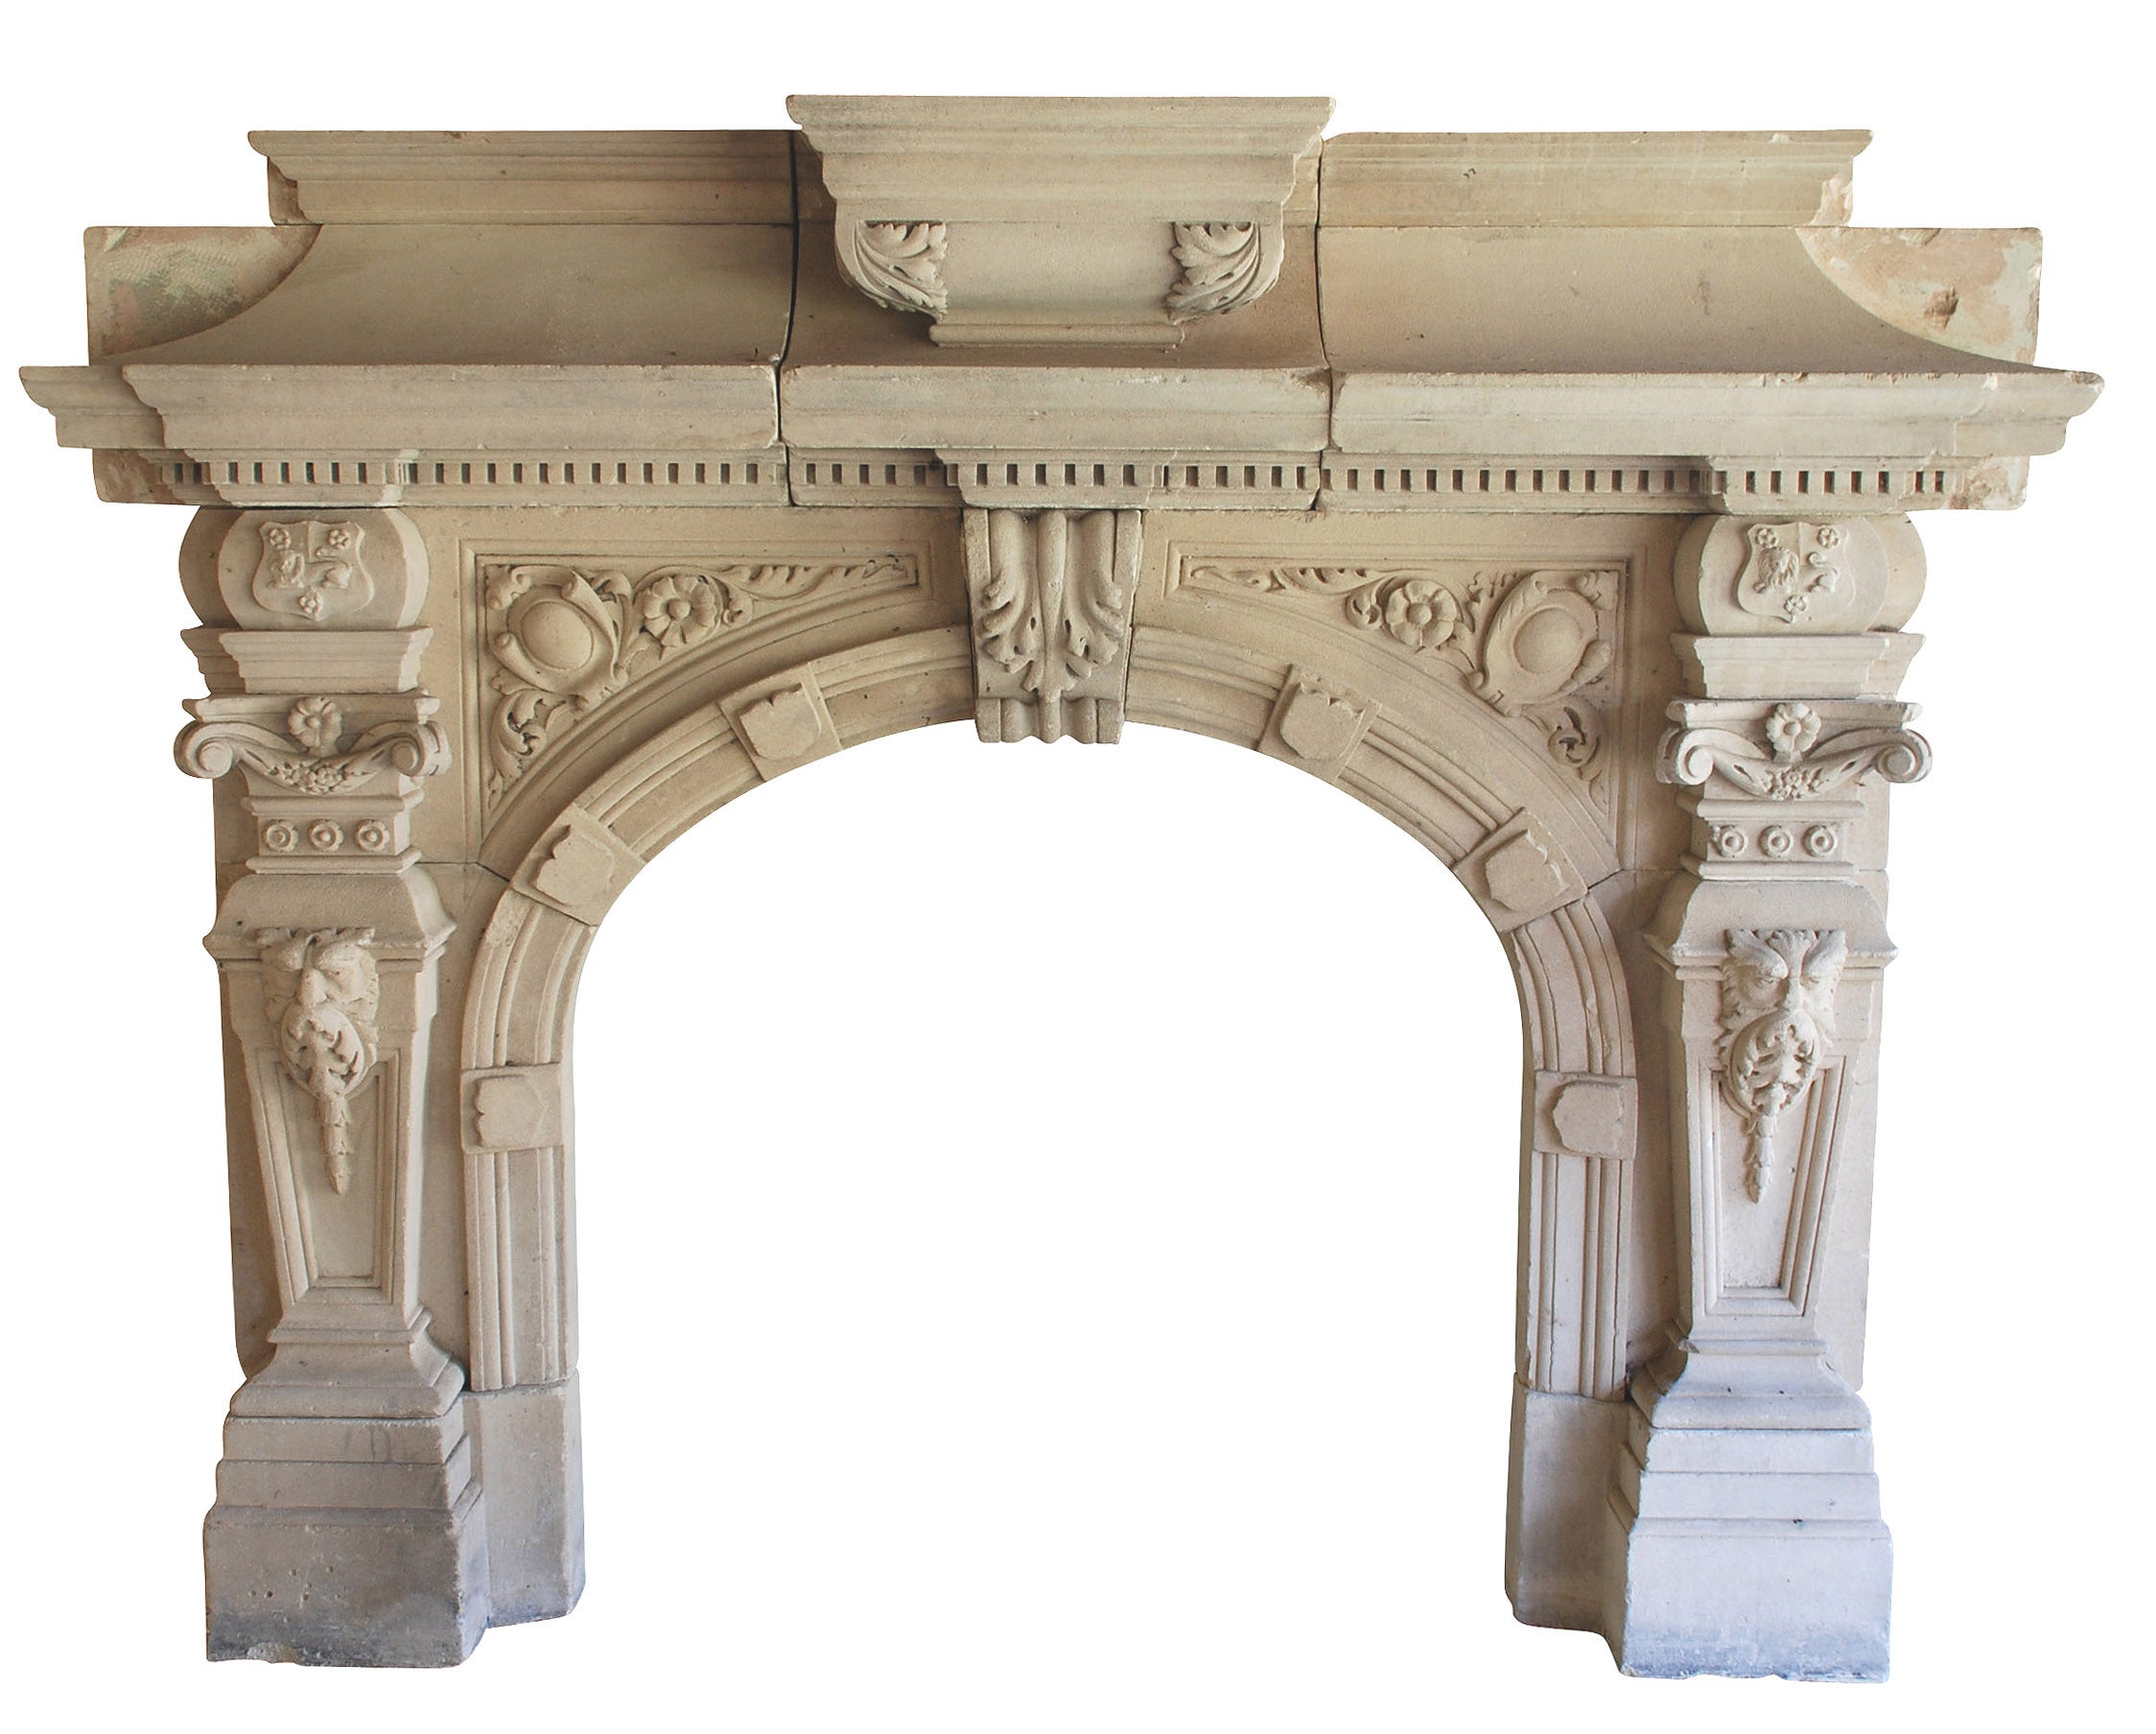 An Impressive Early 19th Century Fireplace In Natural Limestone For Sale